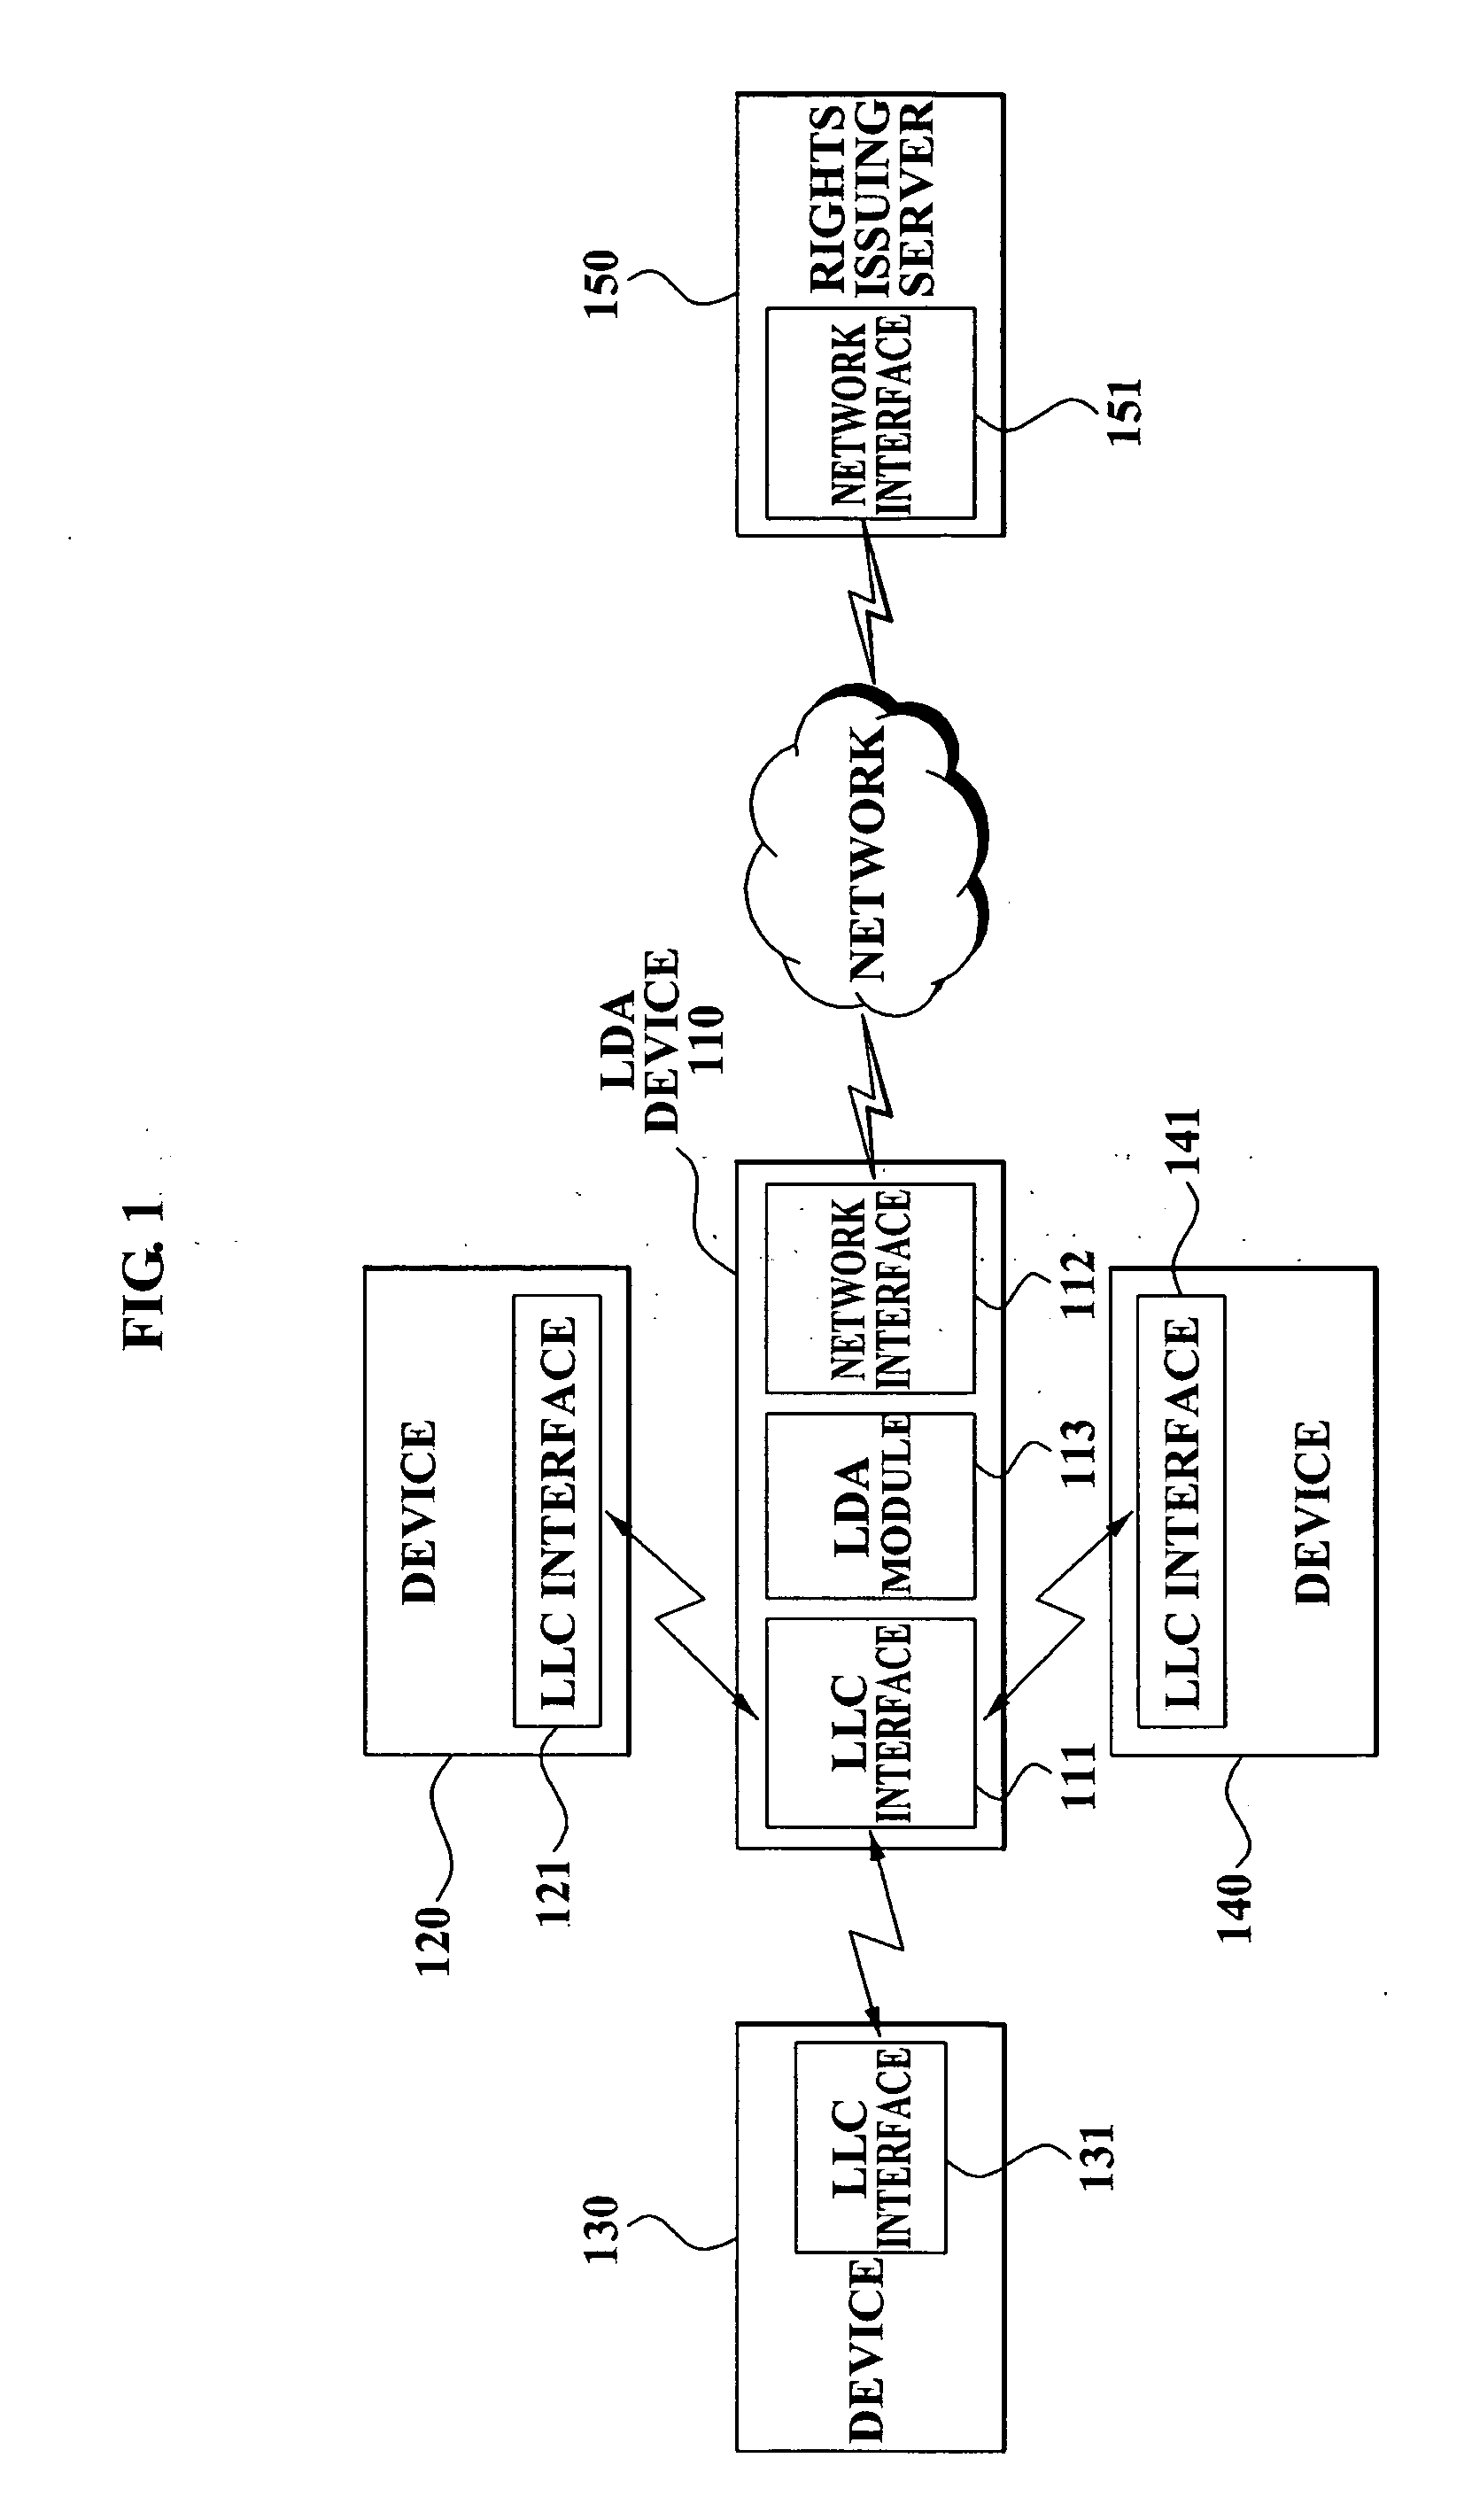 Method and apparatus for local domain management using device with local authority module